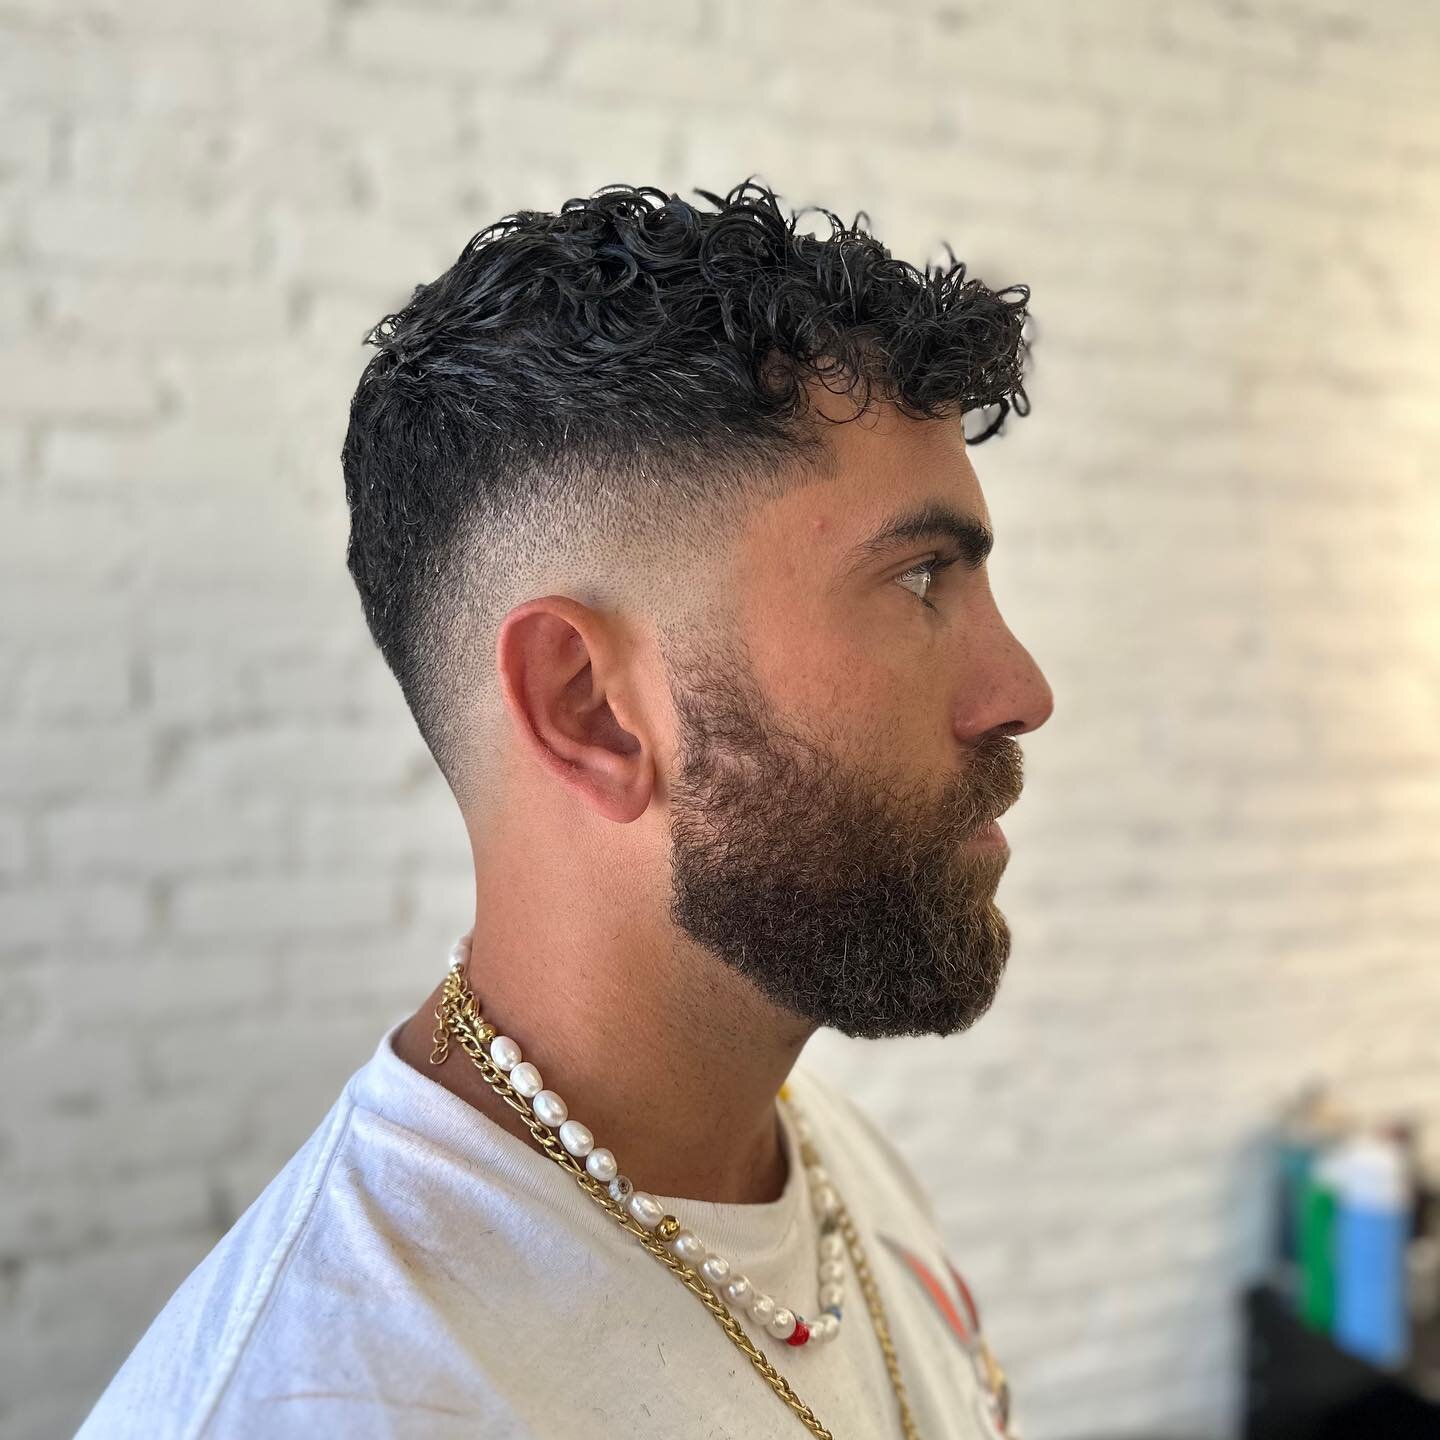 Haircut on @reza_jax by our barber @cut_by_bobby in our West Hollywood location 💈Weekend Appointments are available now on the Fresha App!
.
.
.
.
.
.
.
.
.
#barbershop #glendale #losangeles #americana #buzzedbarbers #burbank #eaglerock #barbers #ba